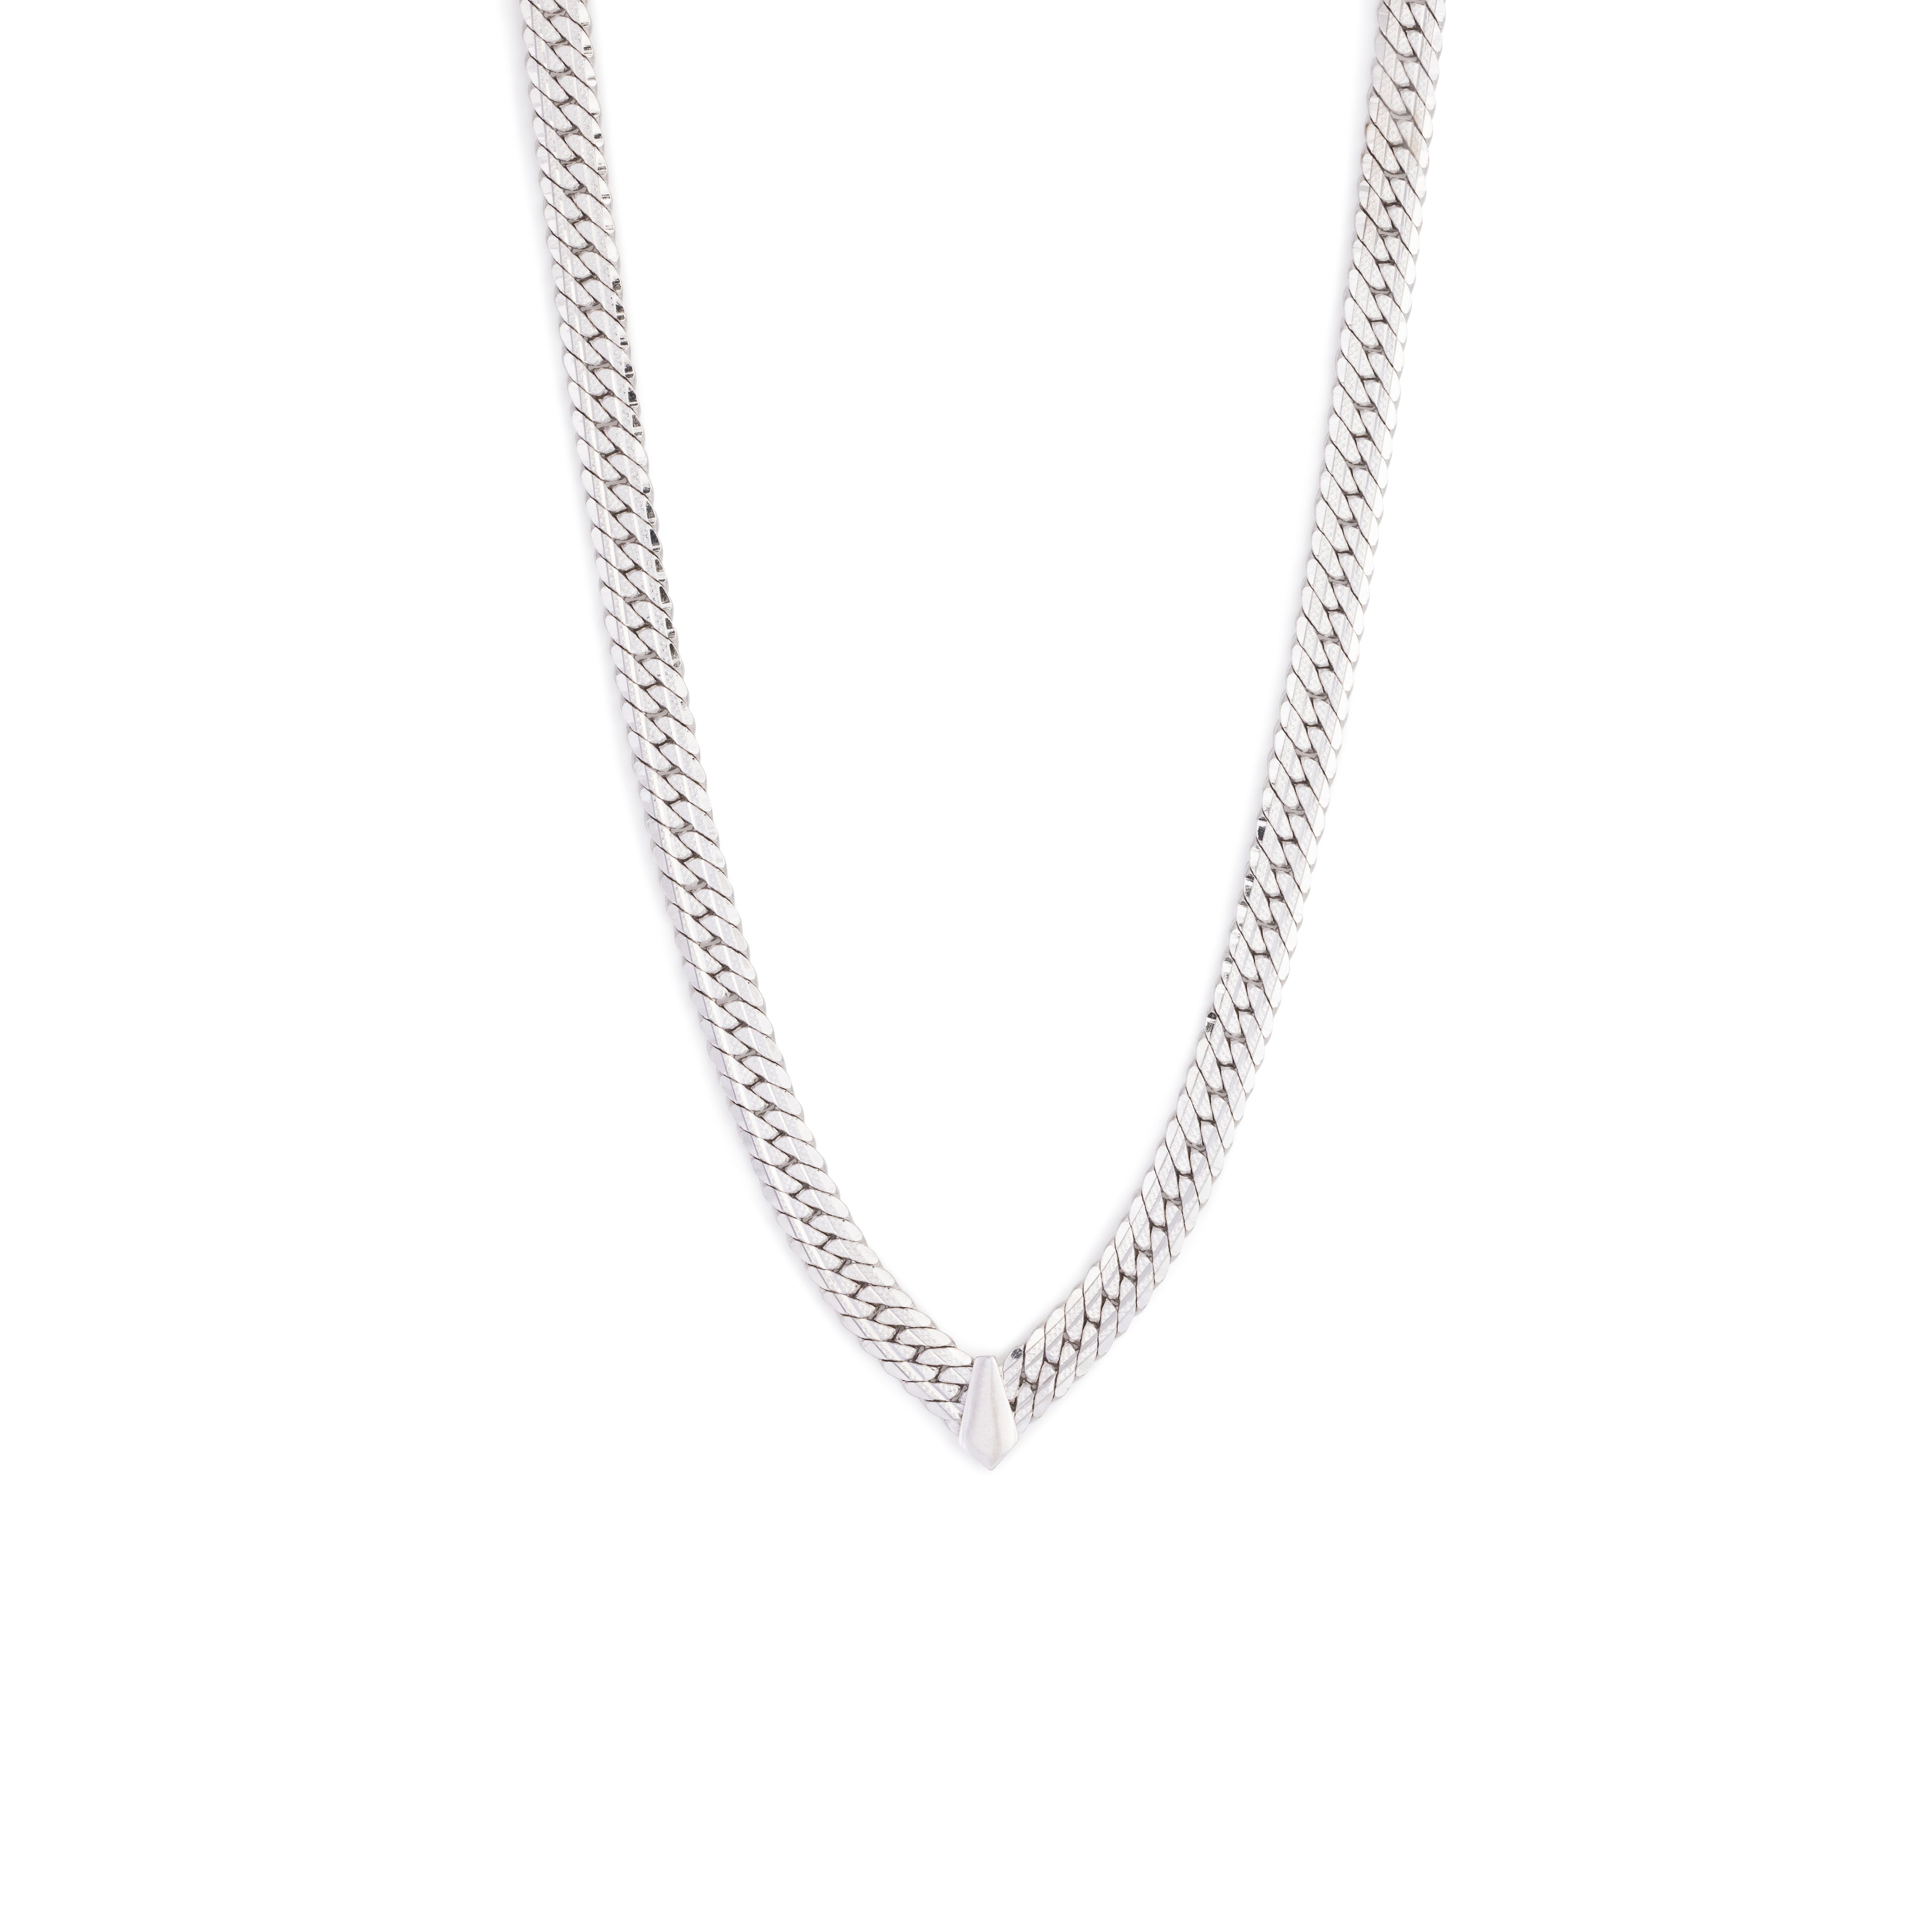 silver Thick Snake Chain Necklace with a detailed point and fold over clasp closure.